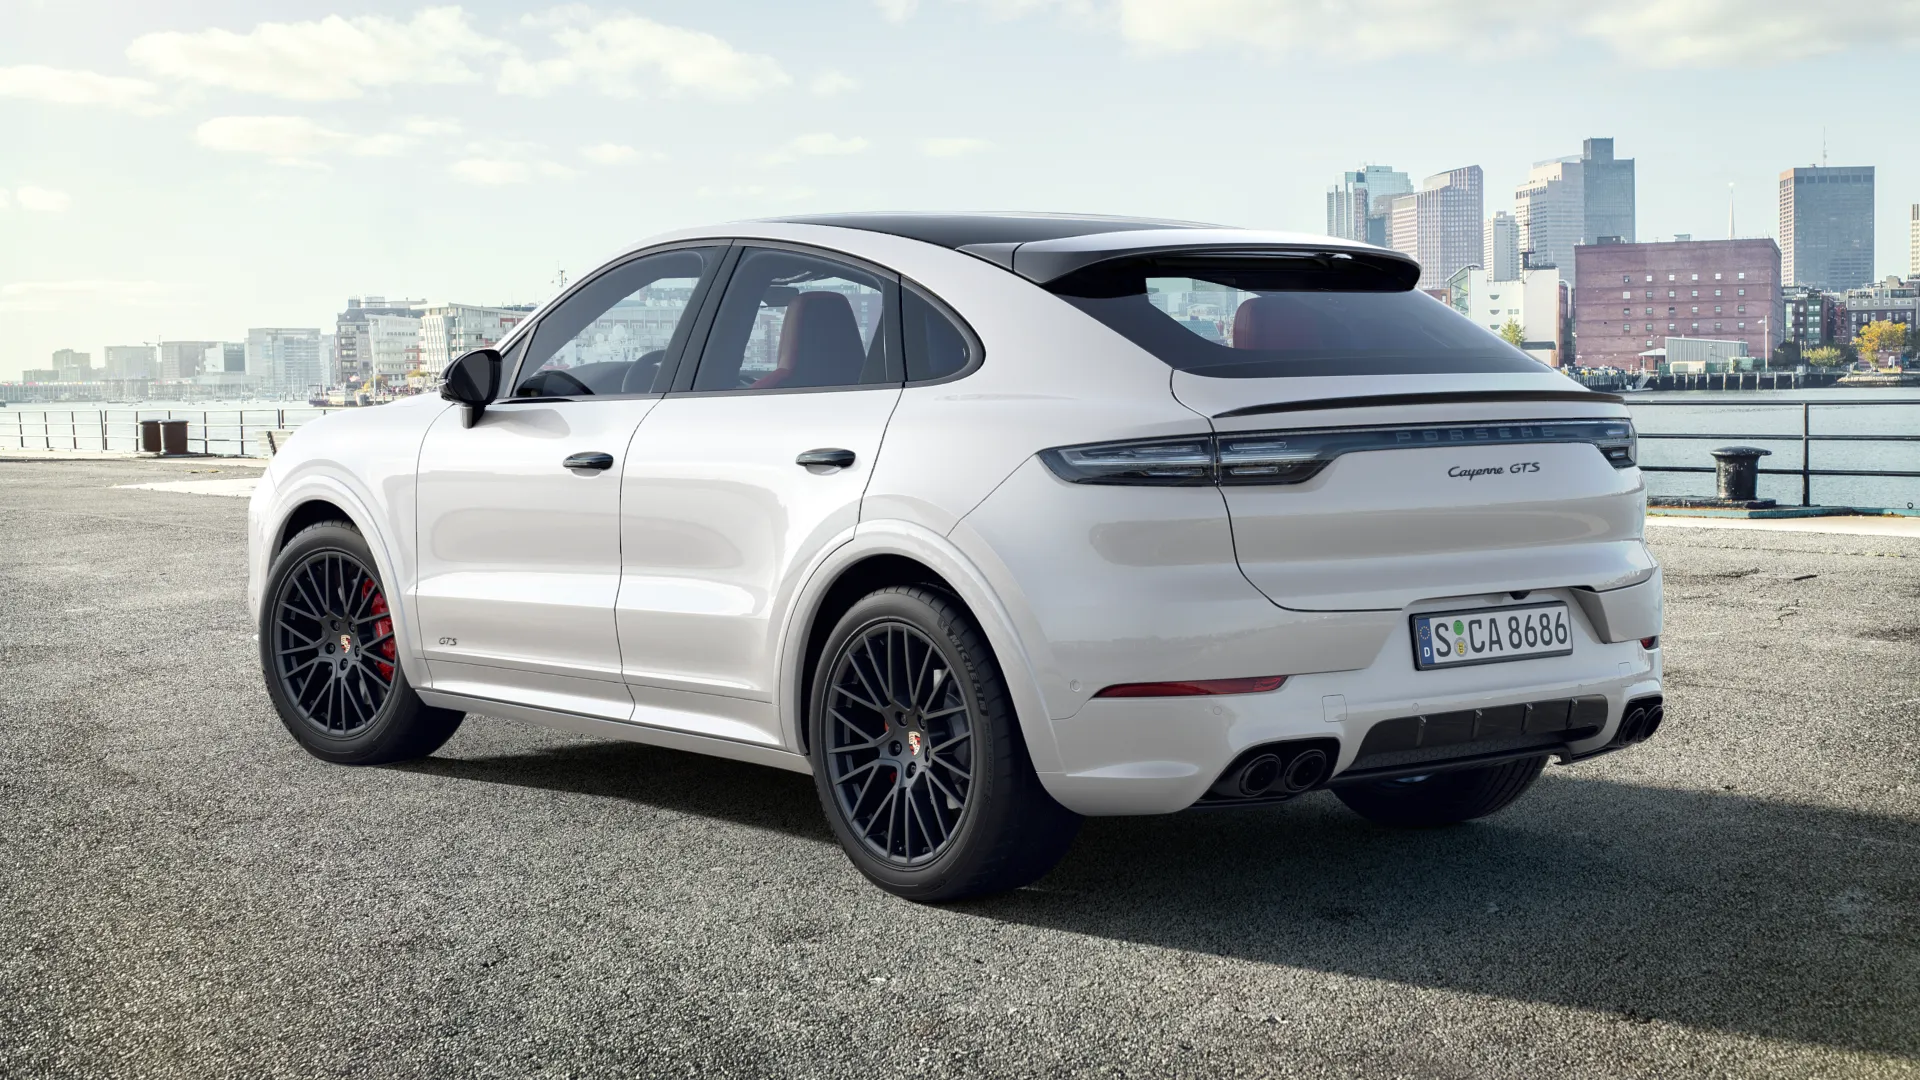 Exterior view of Cayenne GTS Coupe